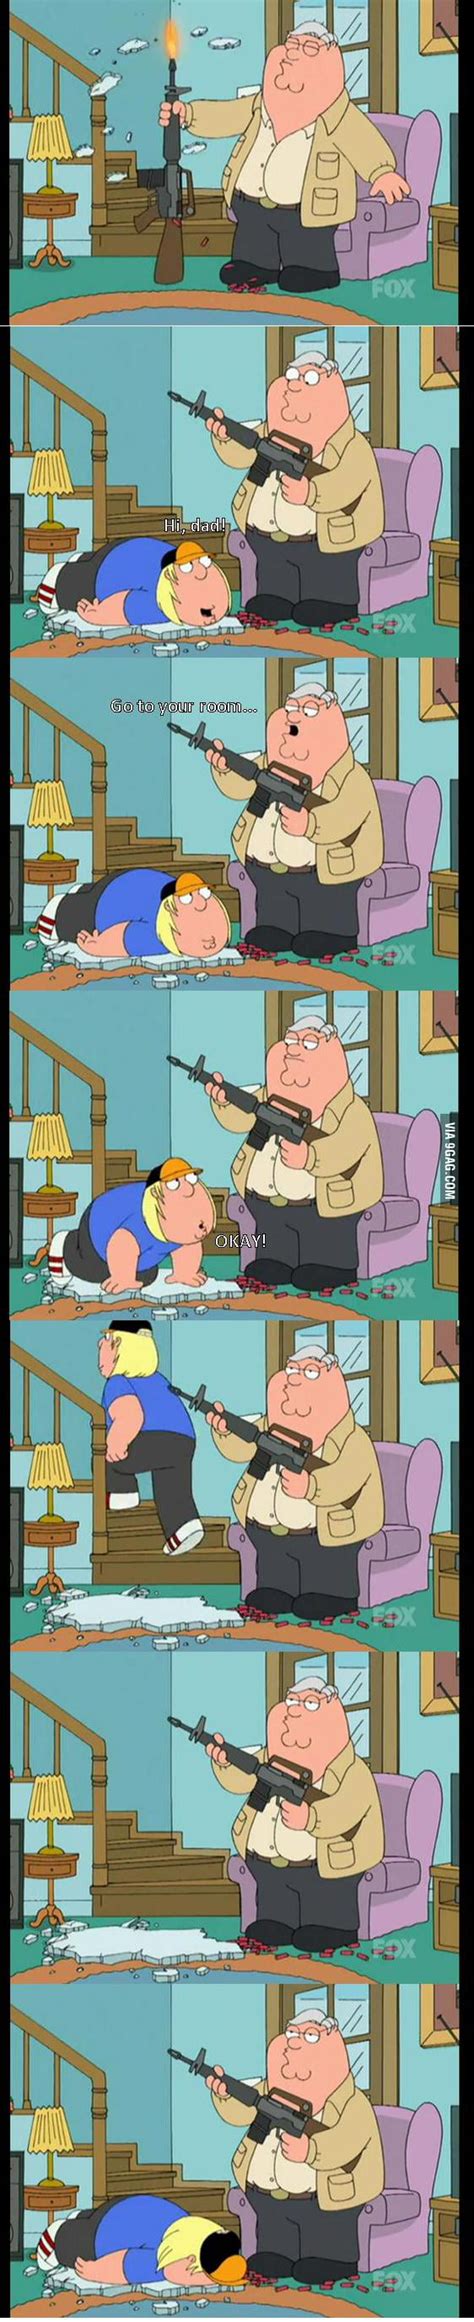 Just Chris Griffin 9gag